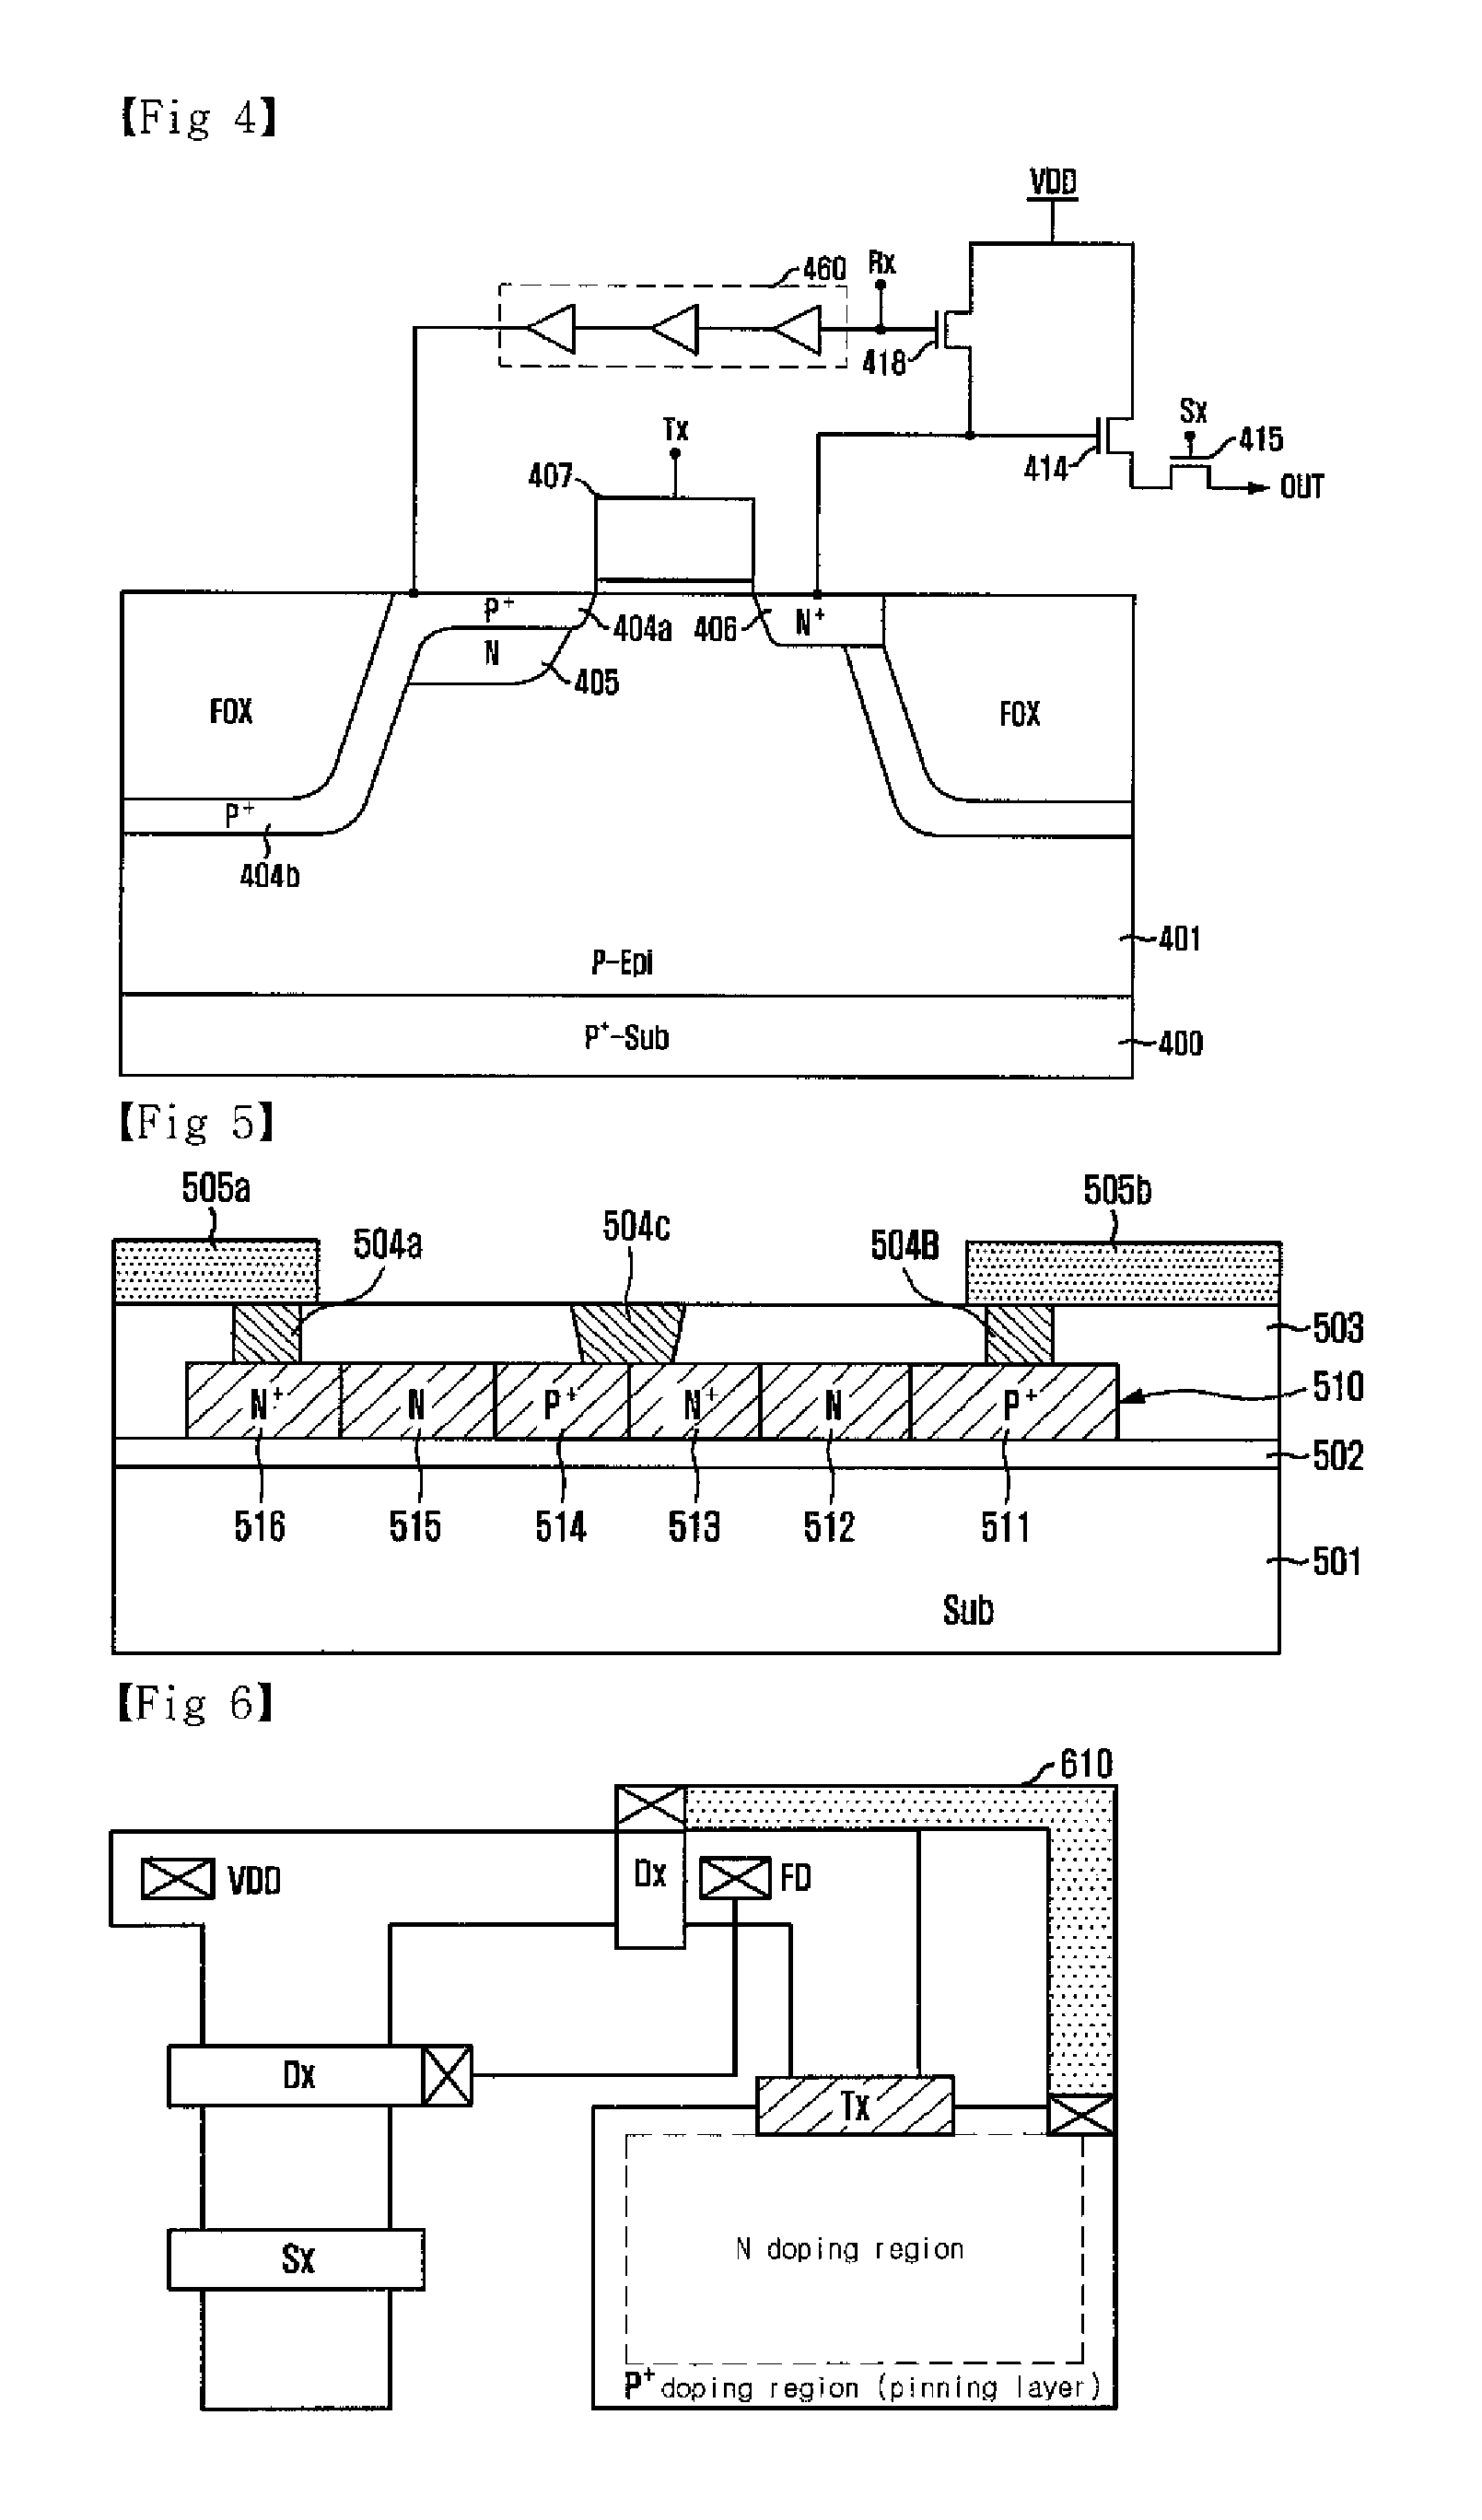 Pixel of image sensor having electrically controllable pinning layer